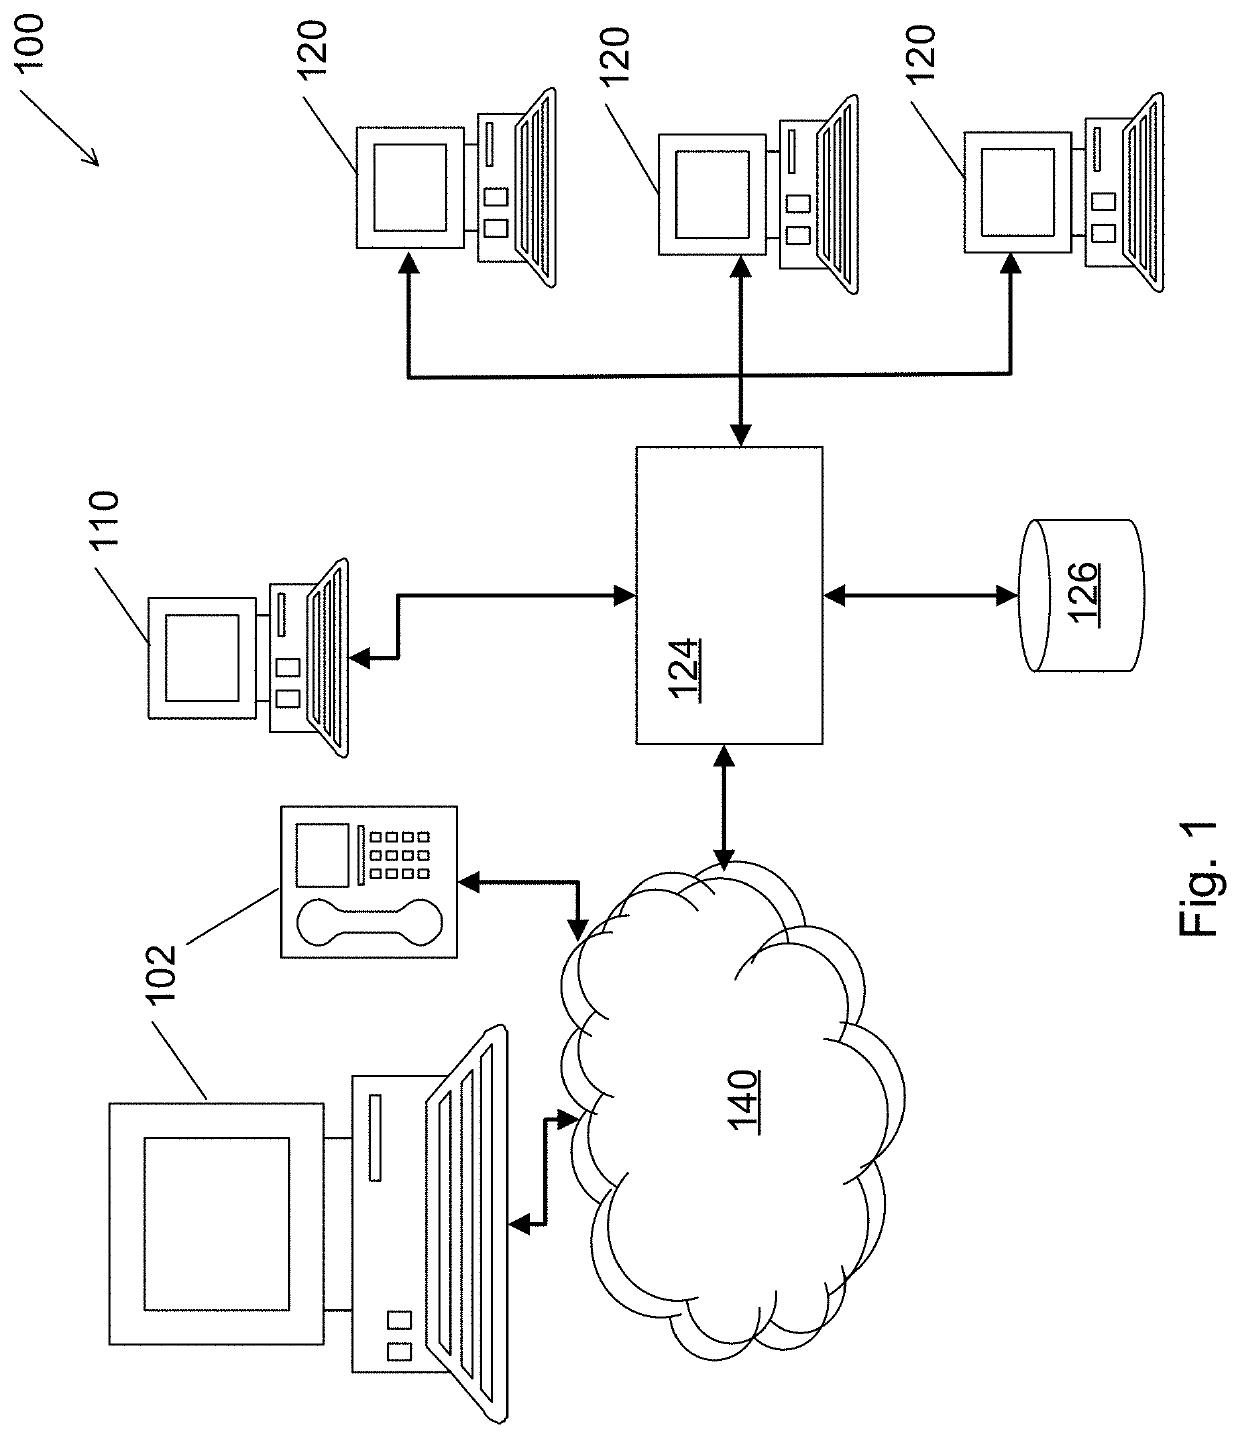 System and method for performing agent behavioral analytics